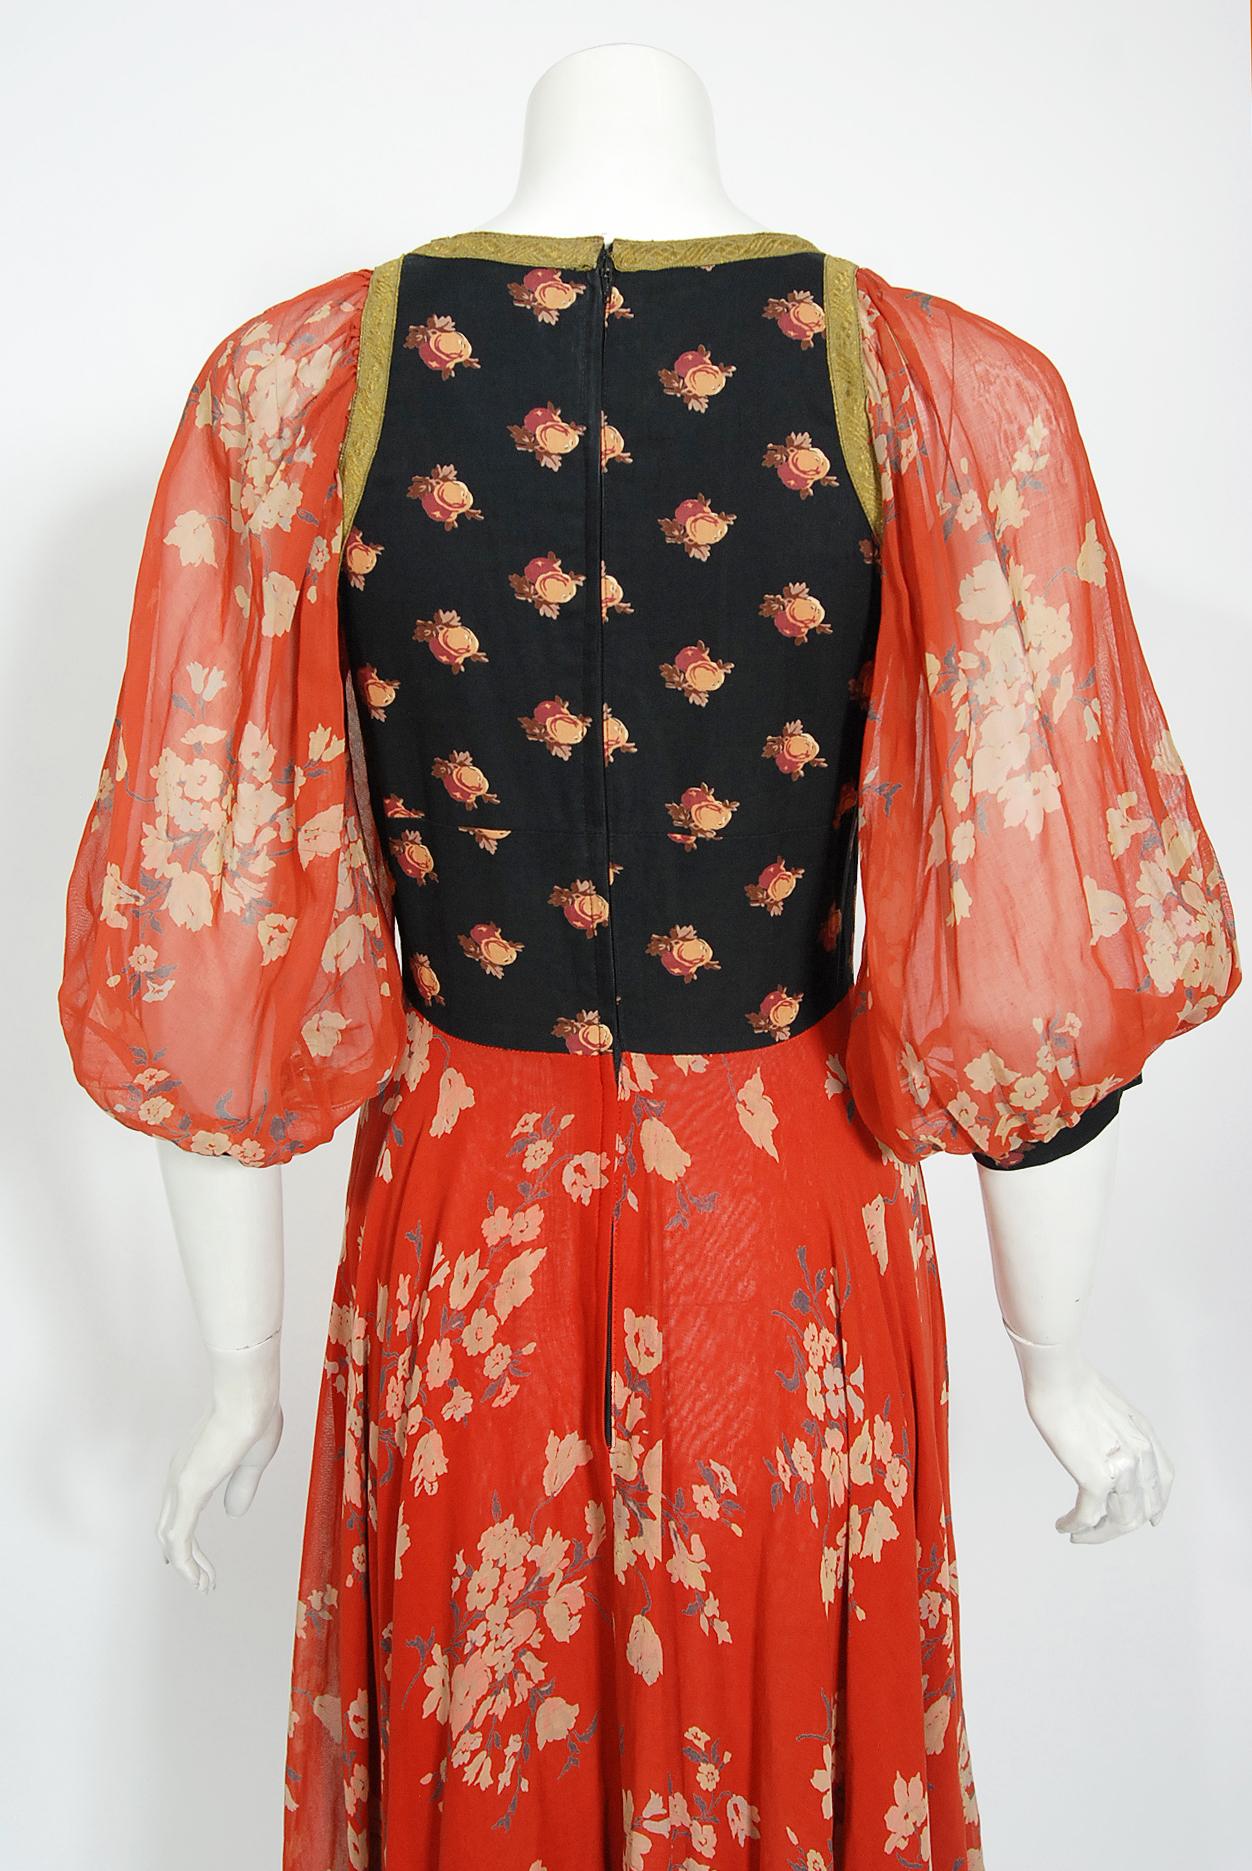 Vintage 1971 Thea Porter Documented Black & Red Floral Print Cotton Gypsy Dress  10